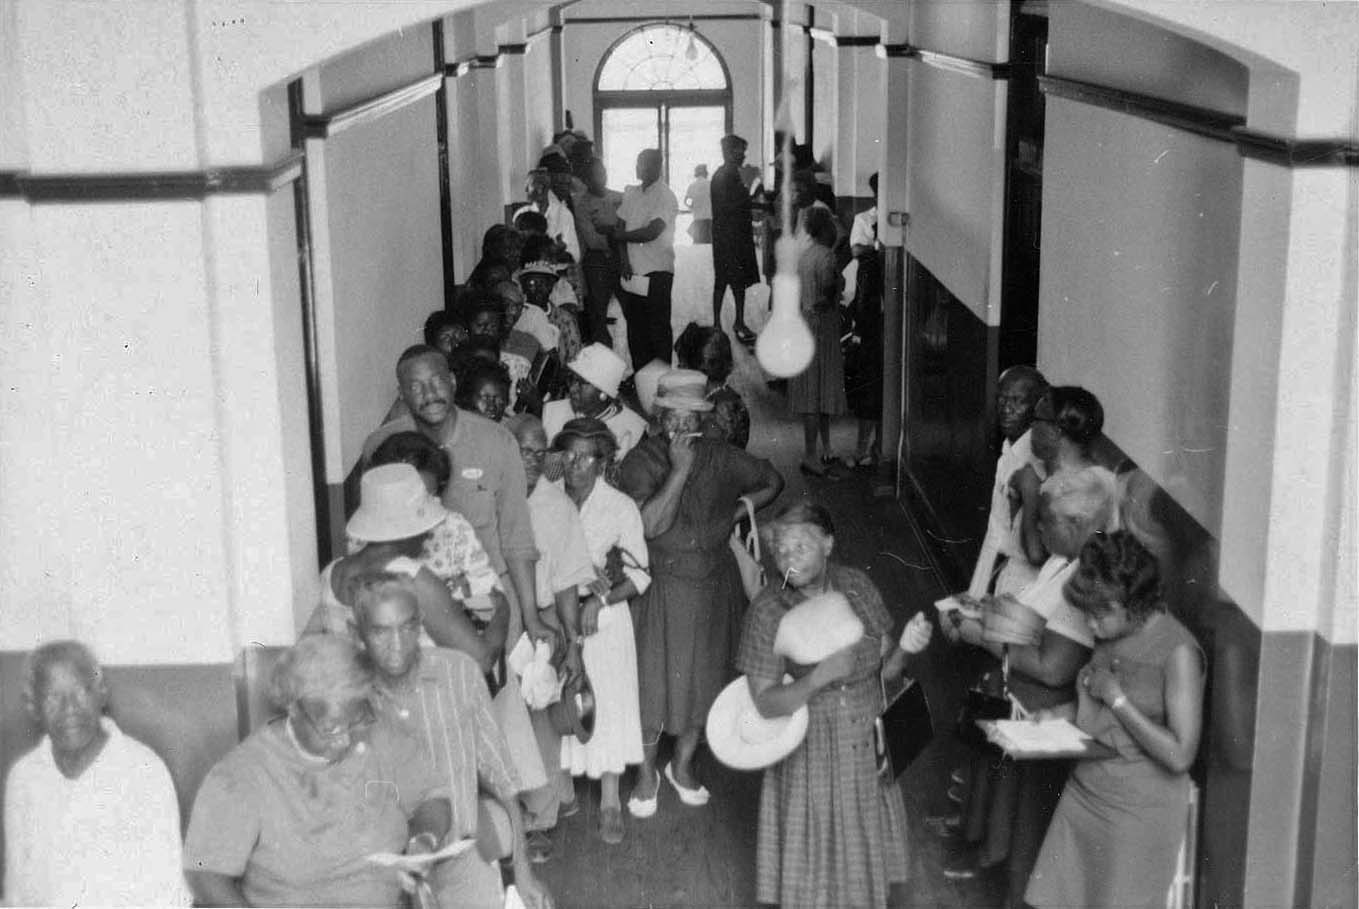 People lined up in the hallway of the courthouse waiting to register to vote